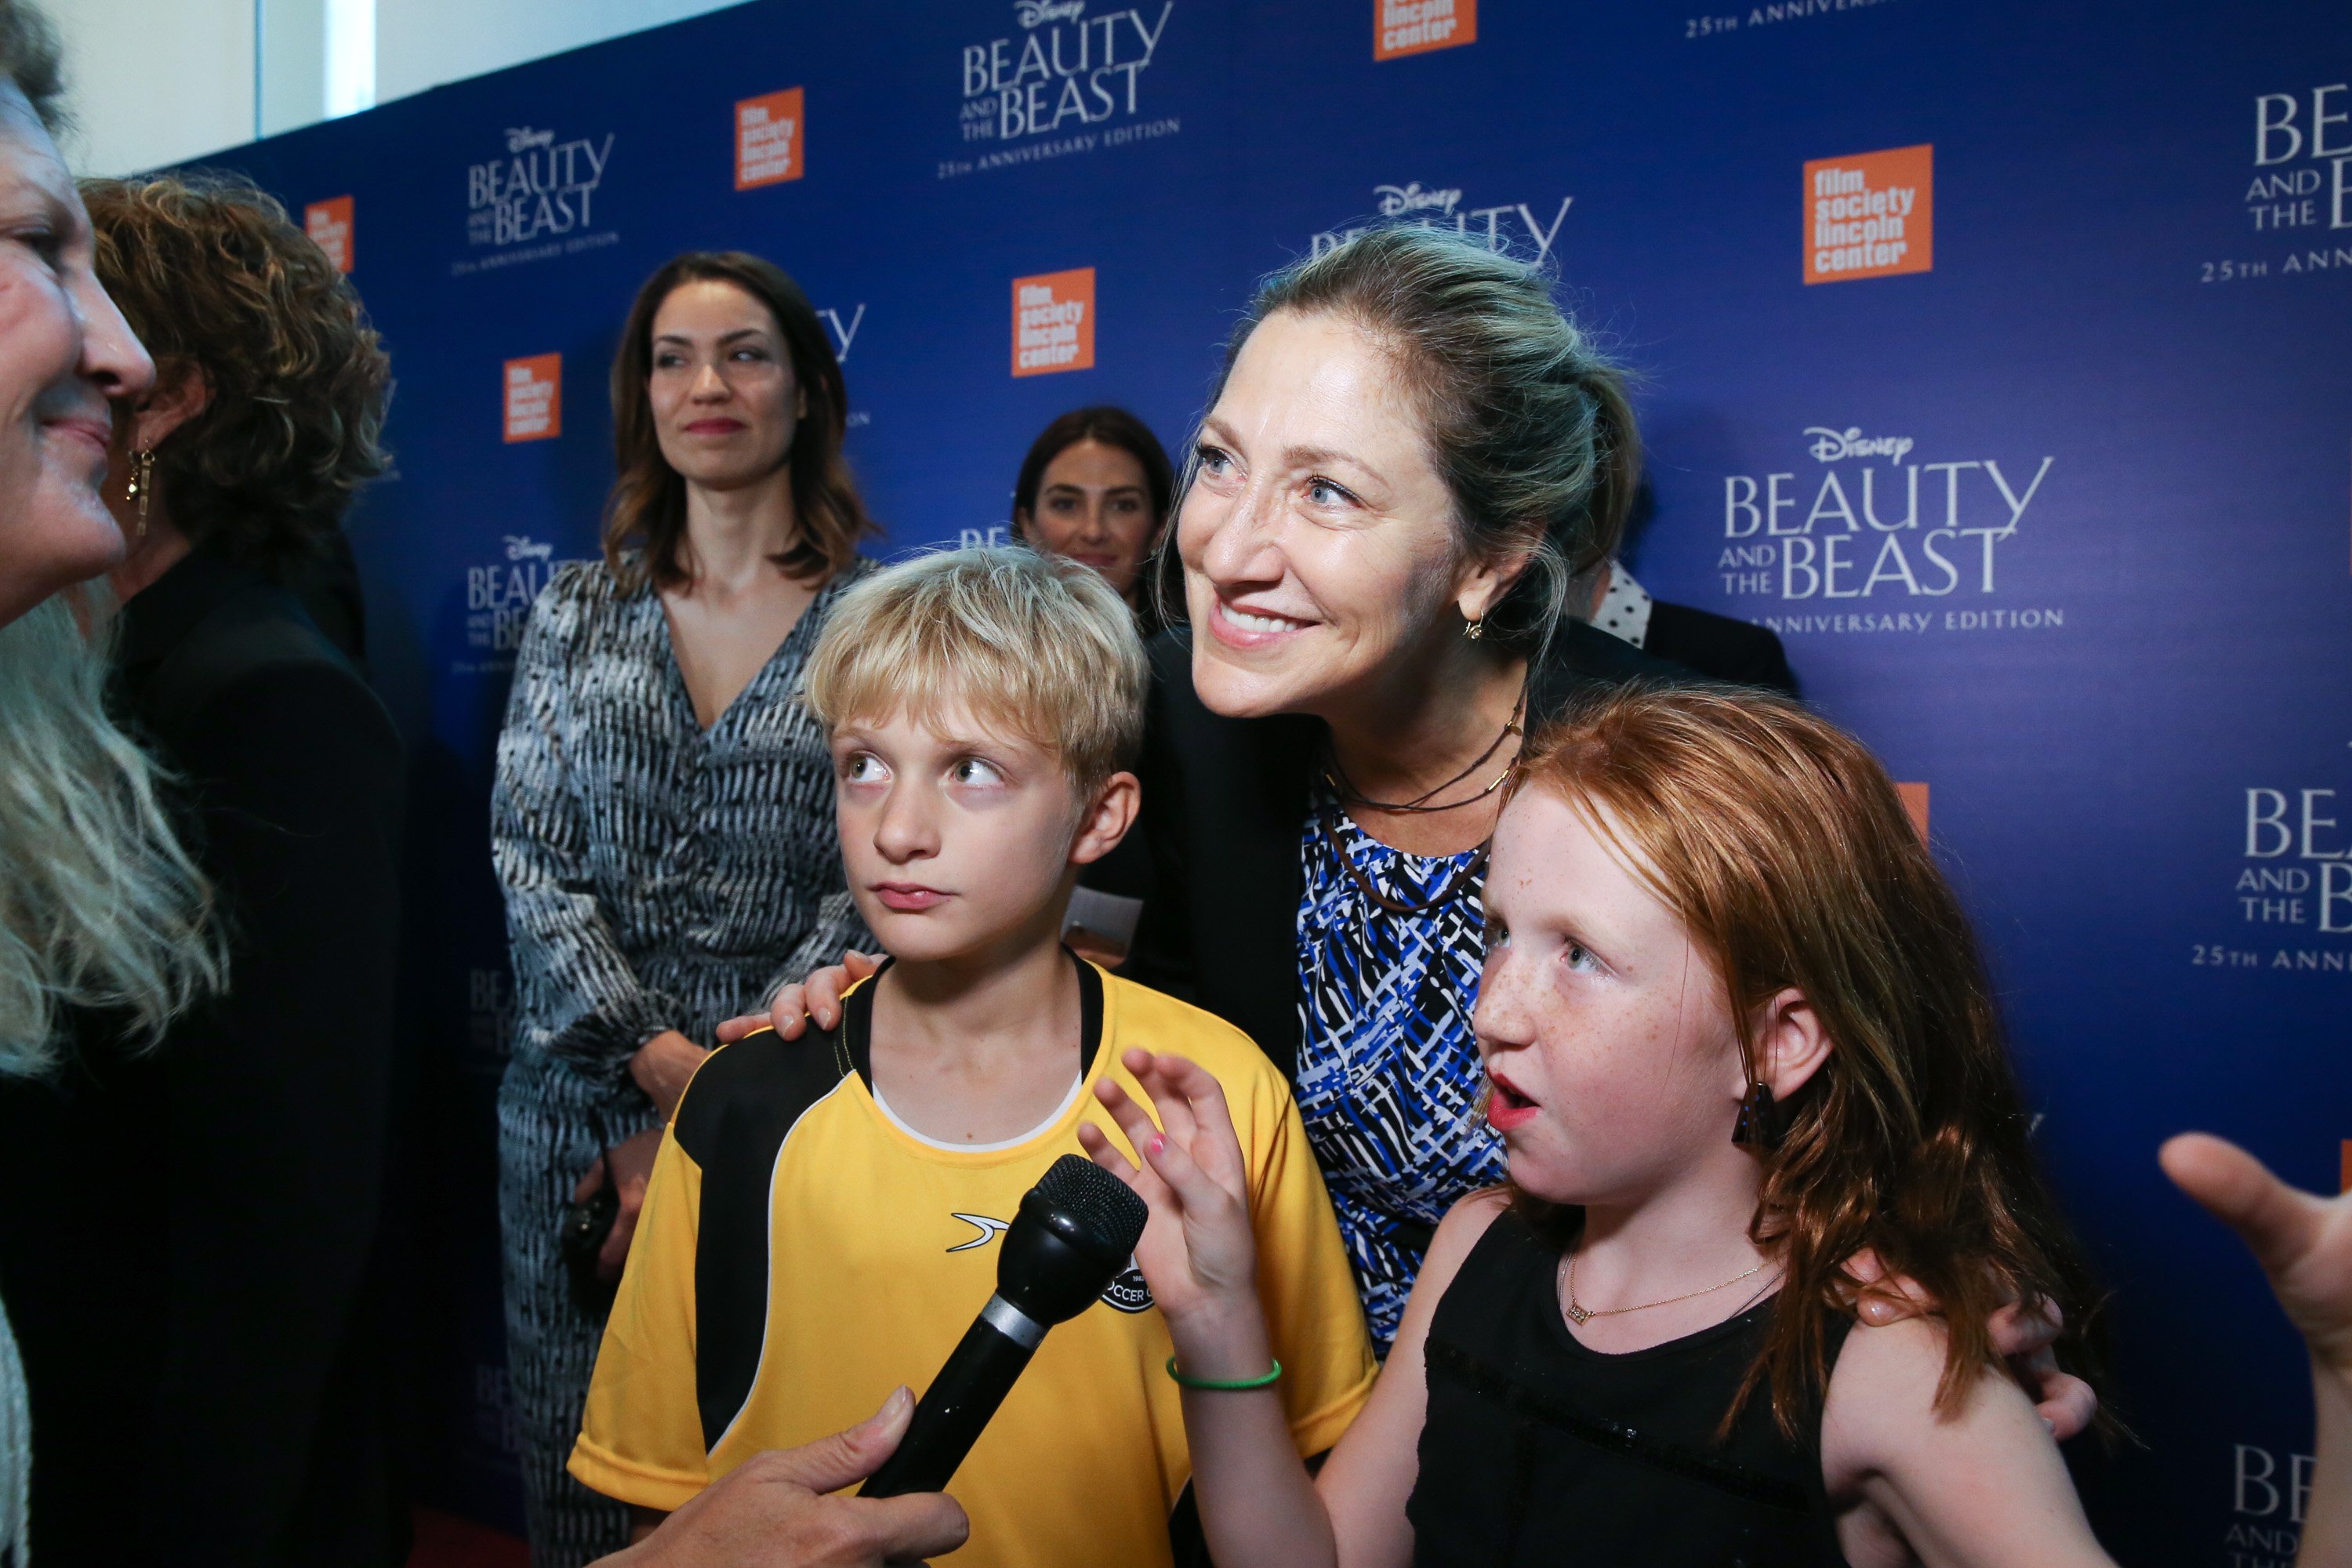 Edie Falco, Macy Falco, and Anderson Falco at the "Beauty & The Beast" 25th Anniversary Screening at Lincoln Center in New York City, New York, on September 18, 2016. | Source: Getty Images